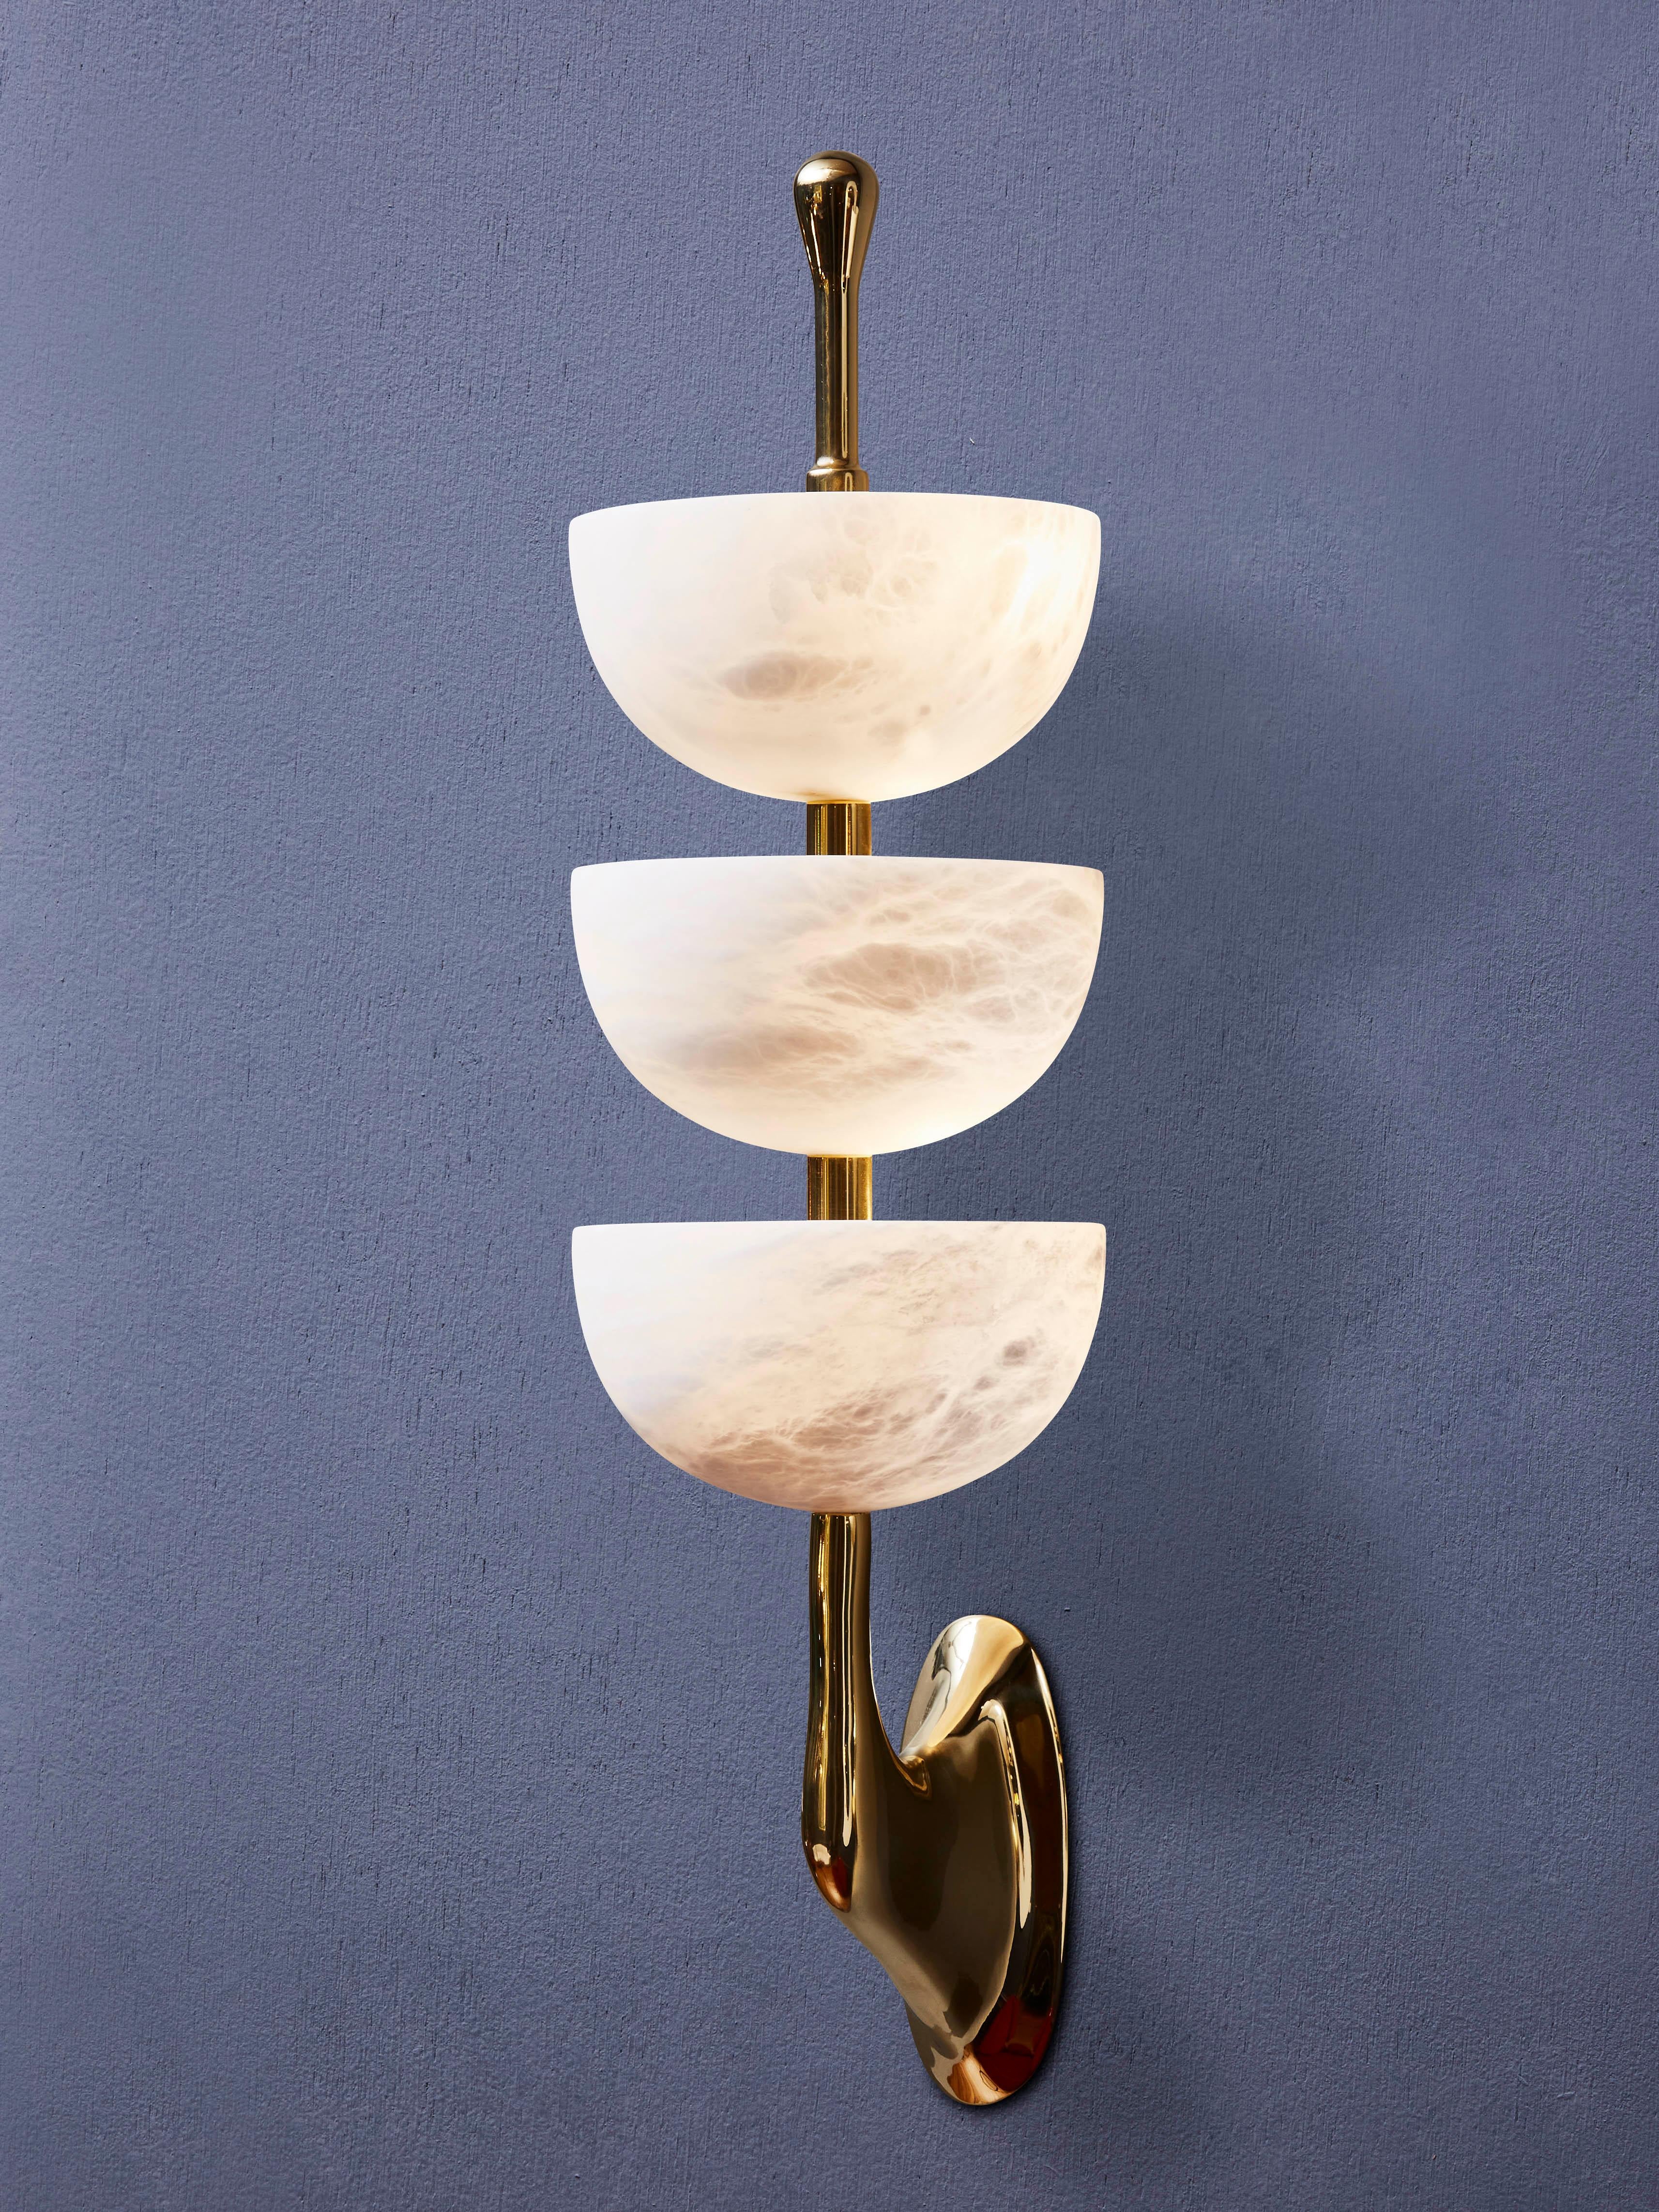 Pair of wall lights in polished brass and enlightened alabaster cups.
France, 2023.